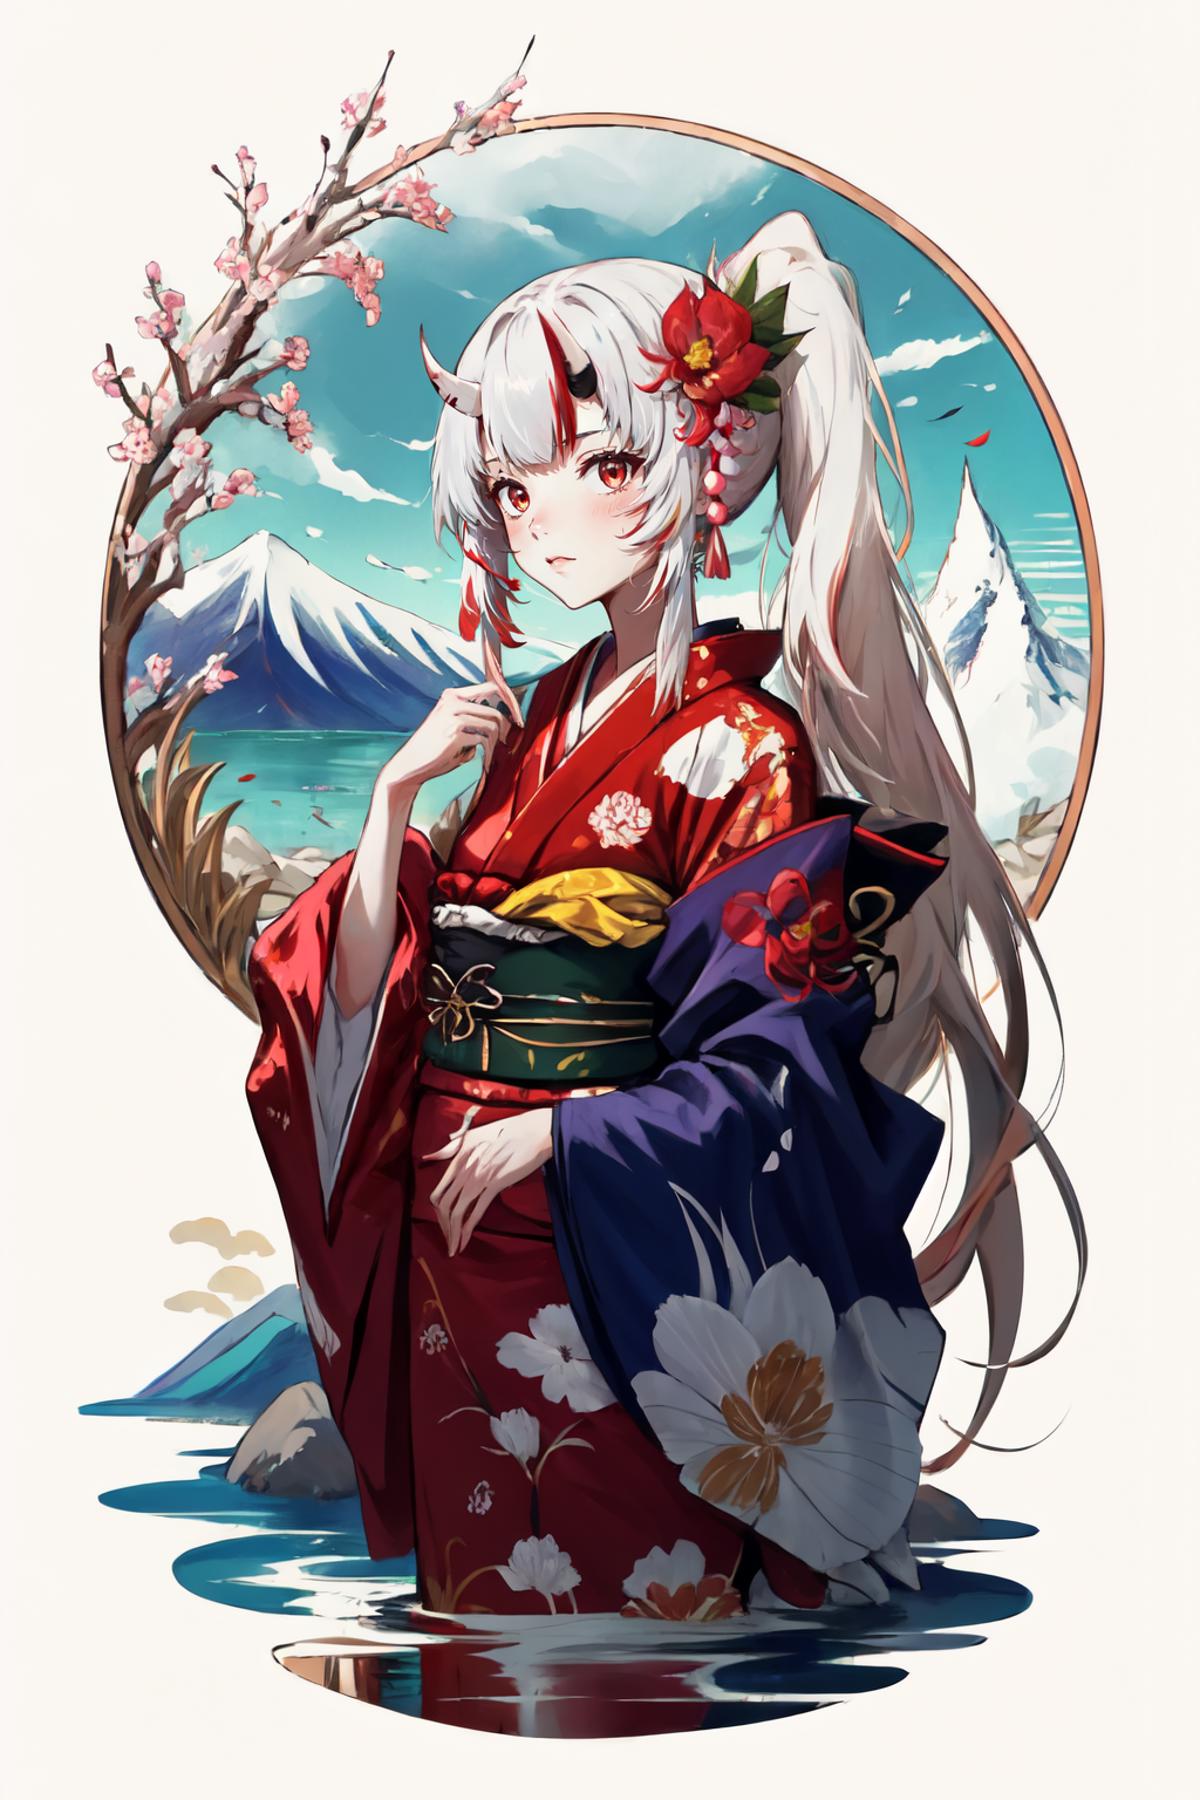 Anime-style artist's drawing of a woman in a kimono, with a flower in her hair.